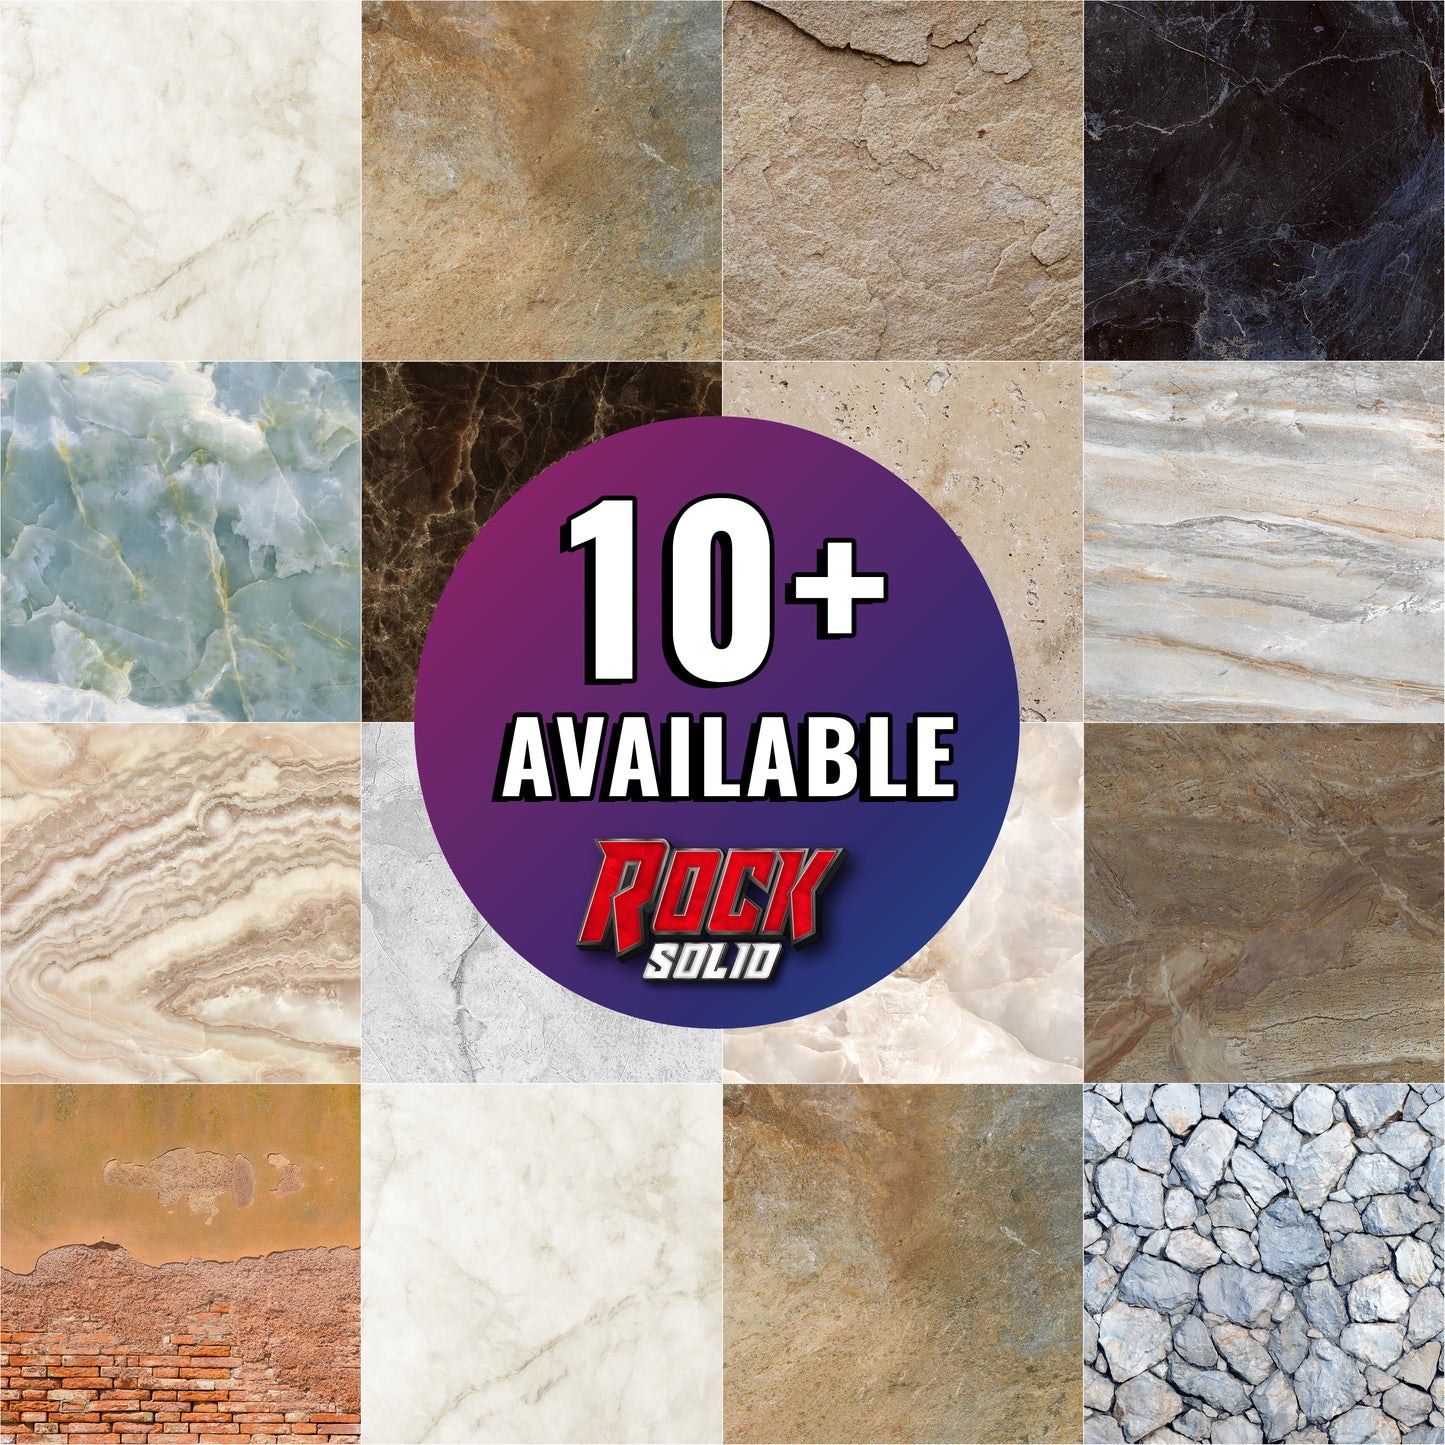 Over 10 styles of stone available in our RockSolid line of products